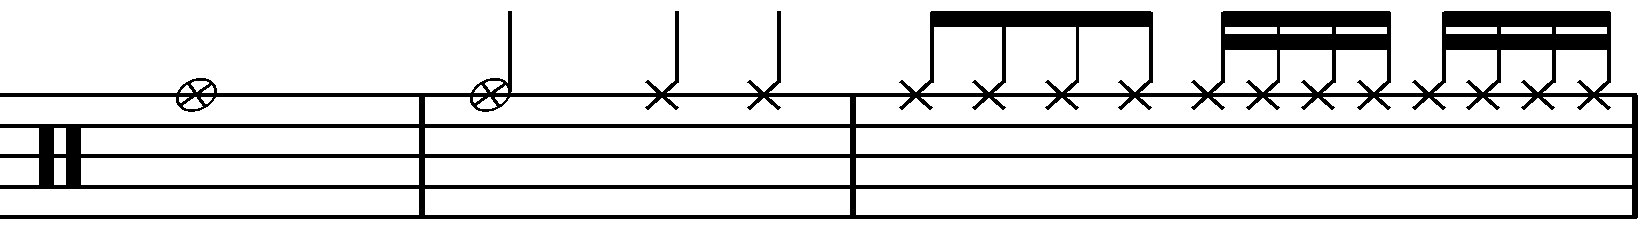 Examples of ride notation